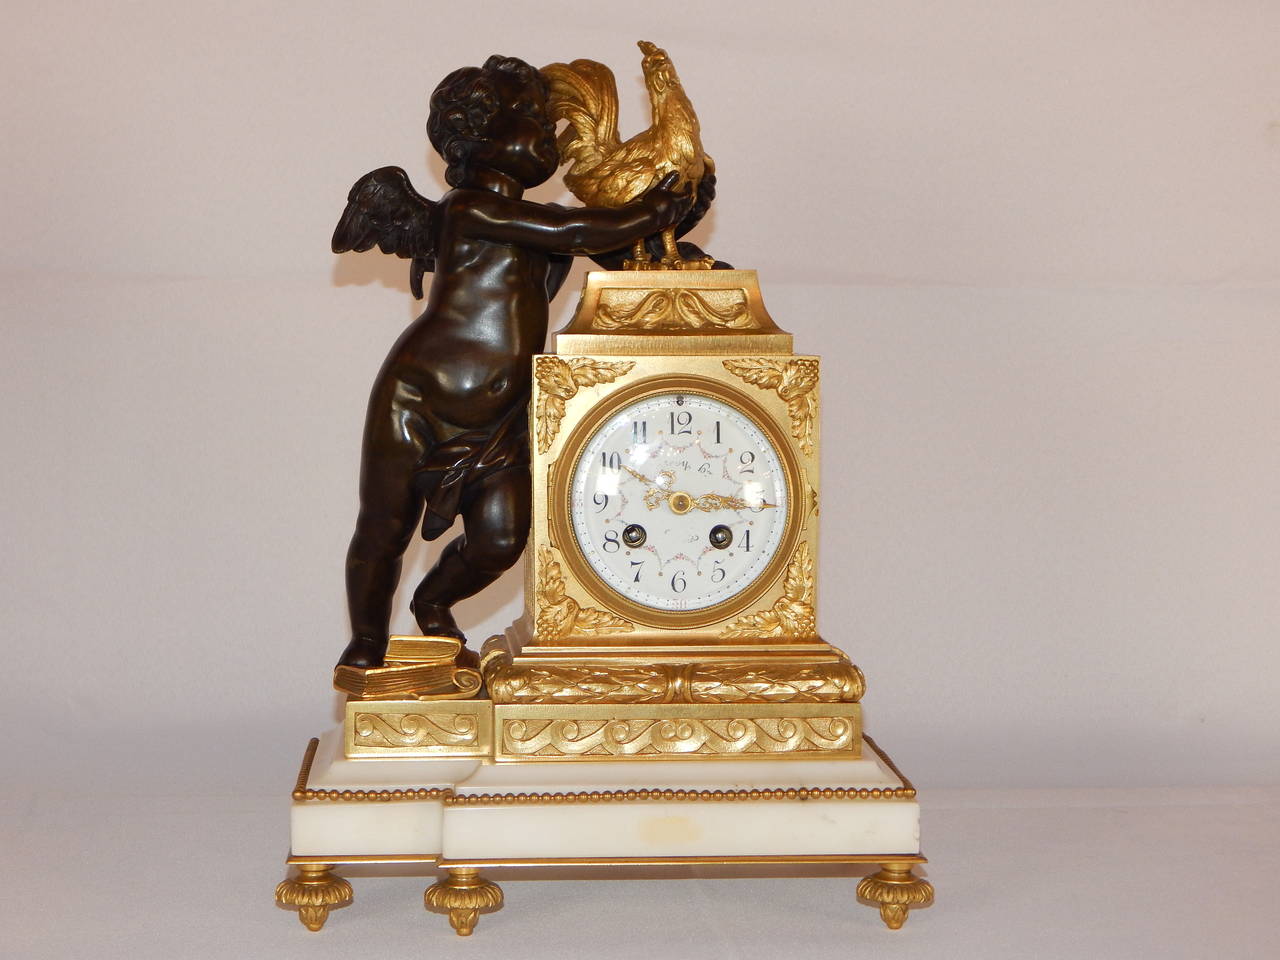 A very fine quality Louis XVI style bronze and white marble clock set in the Louis XVI style. Exquisitely modeled, this is a large, heavy and finely detailed set. It features a putto standing on a pile of books, playfully grabbing a cockerel or